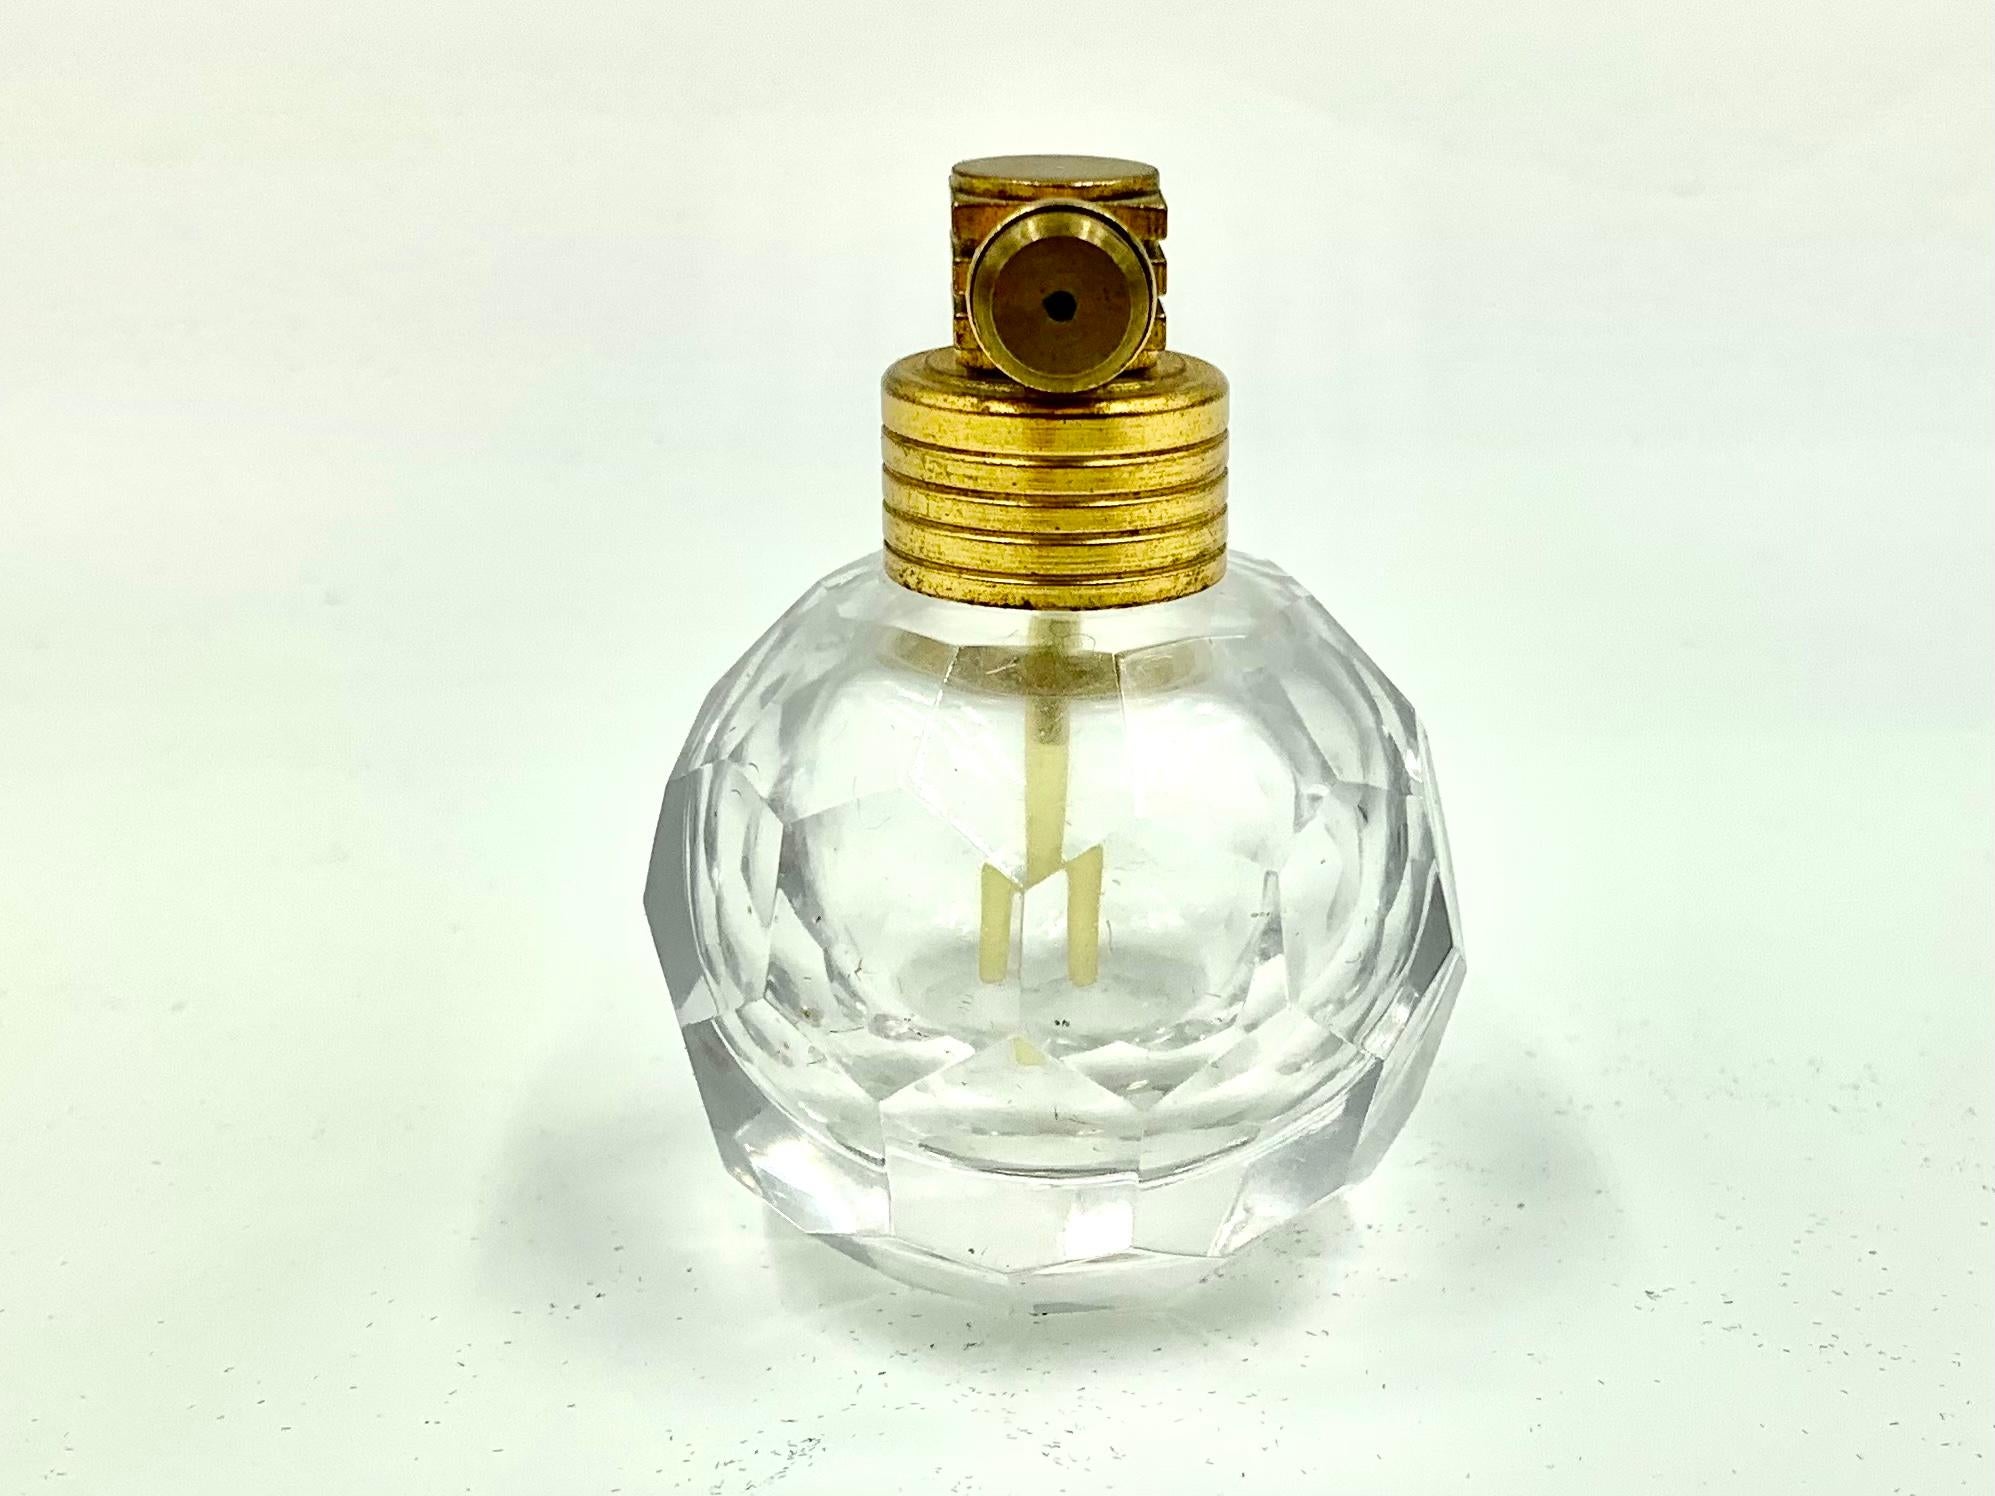 Beautiful diminutive Art Deco period cut crystal perfume bottle atomiser with high quality stylized gilt bronze top and handcut honeycomb pattern crystal body. Baccarat quality.
Early 20th century
Rare Size, perfect for fine perfume and a stunning